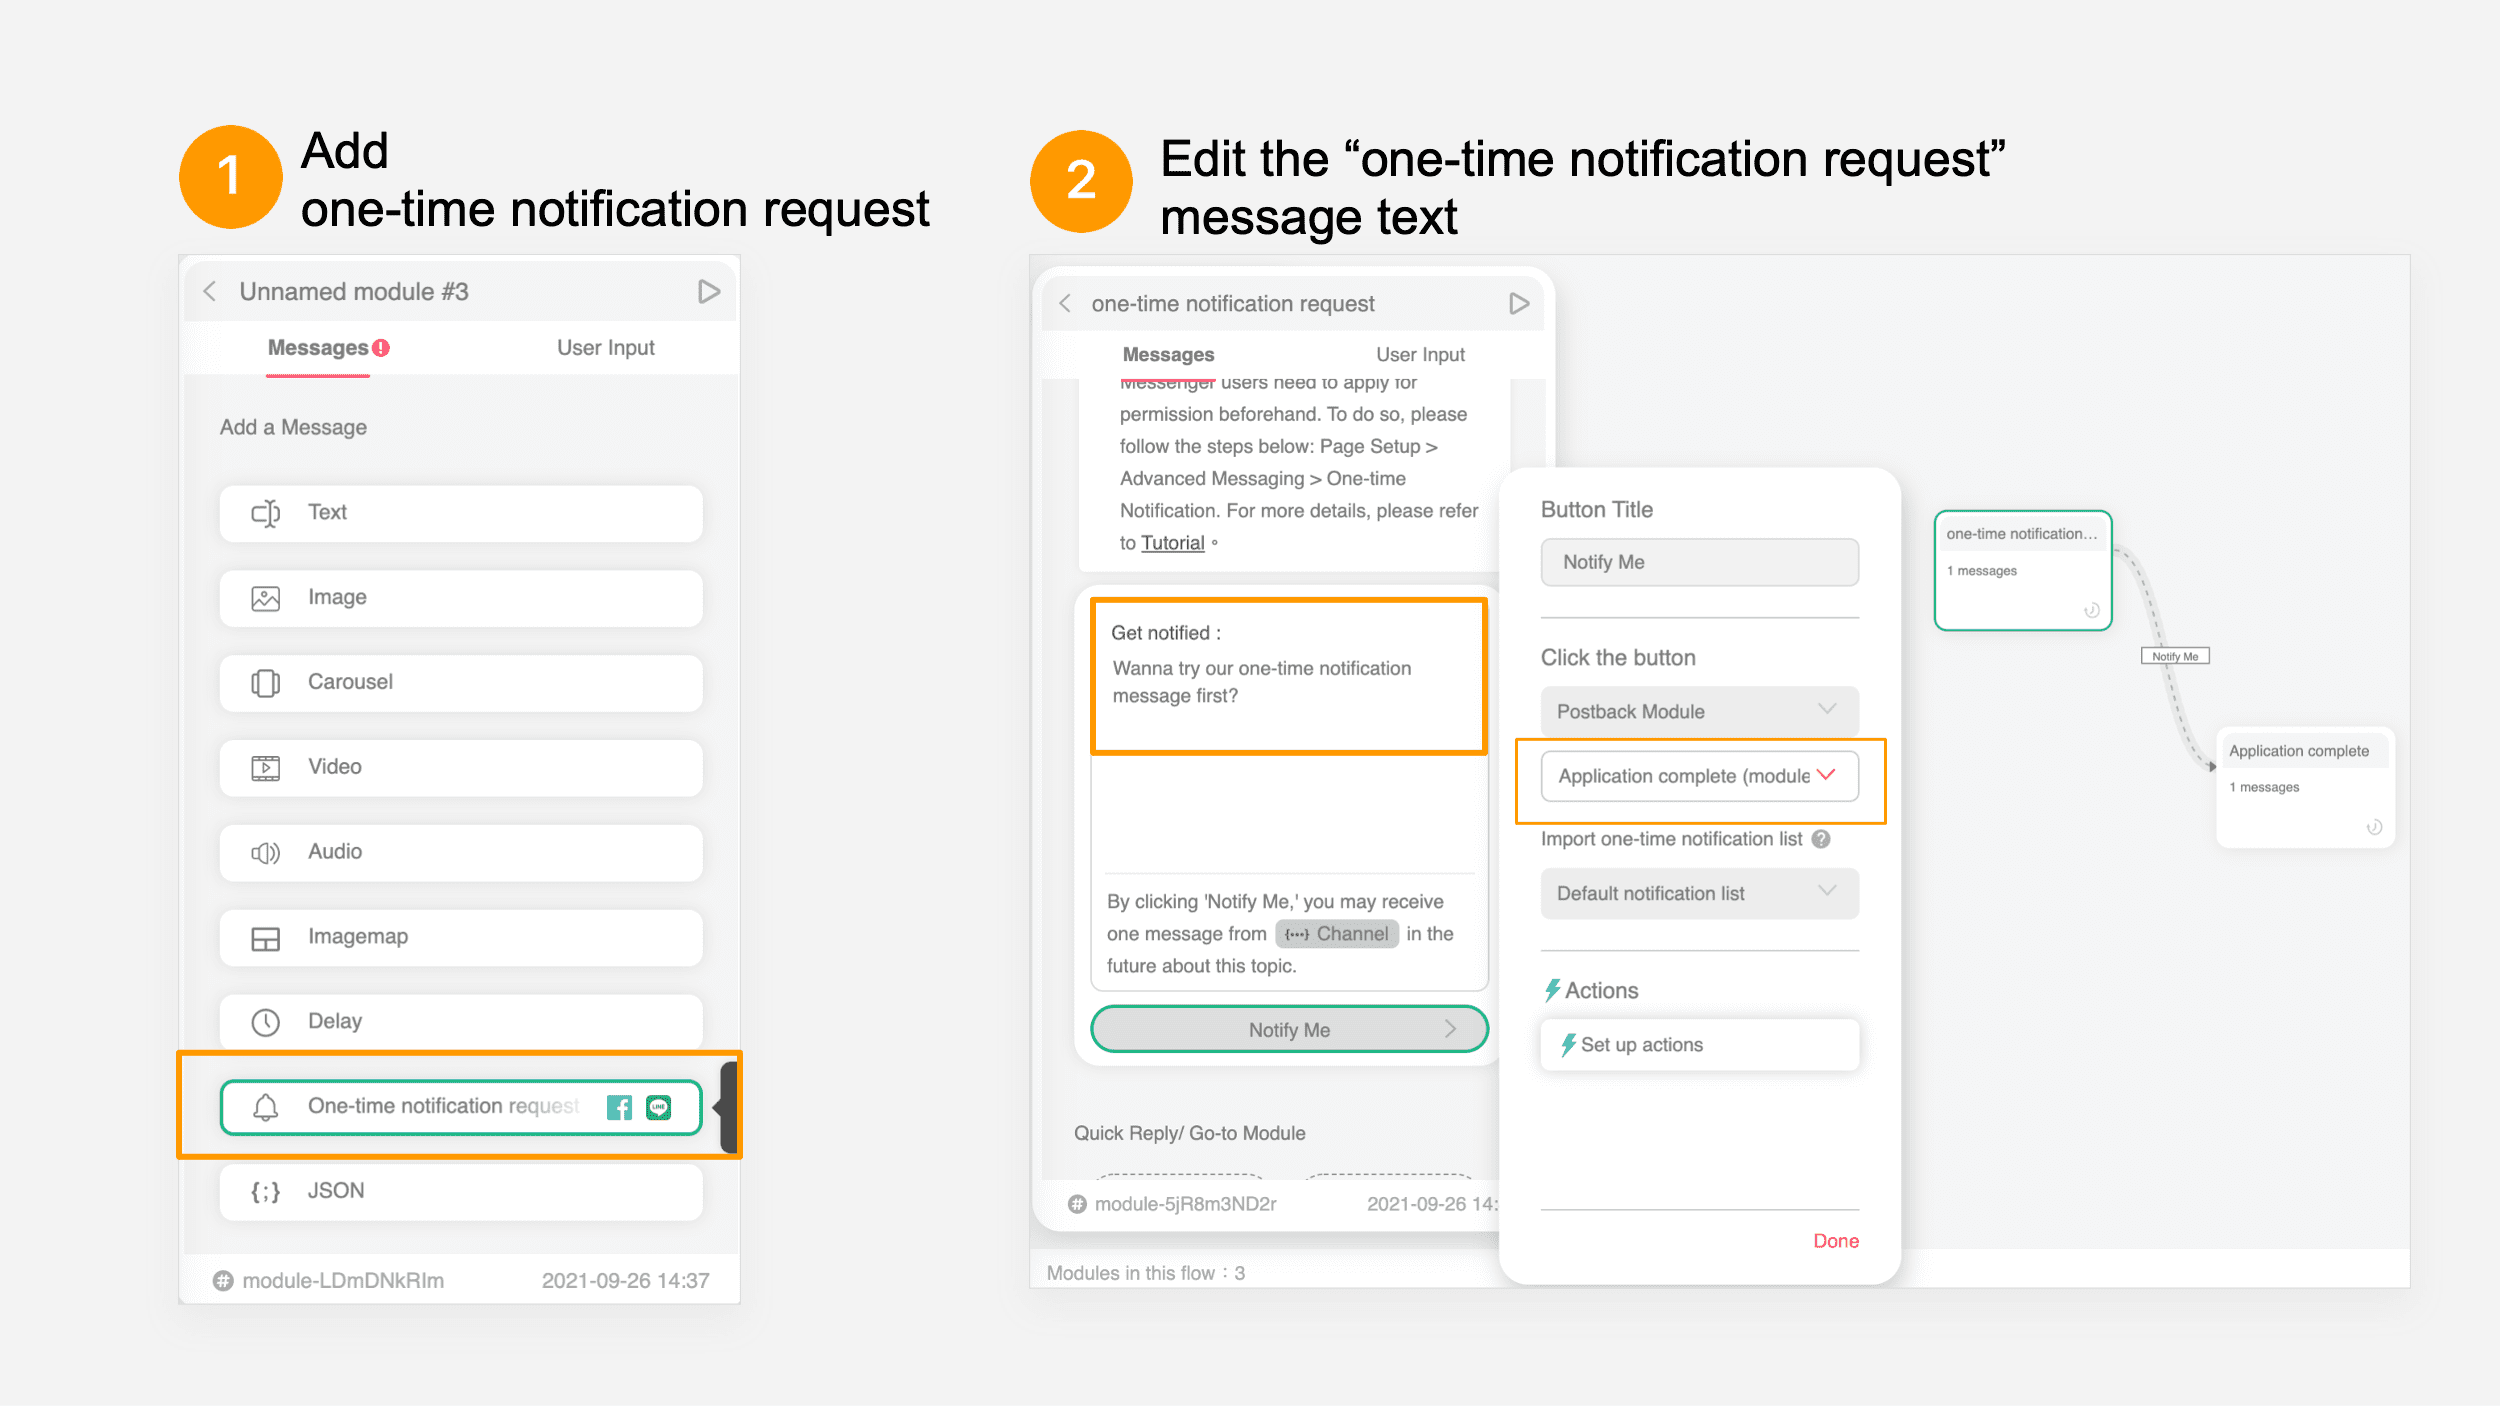 Add one-time notification request